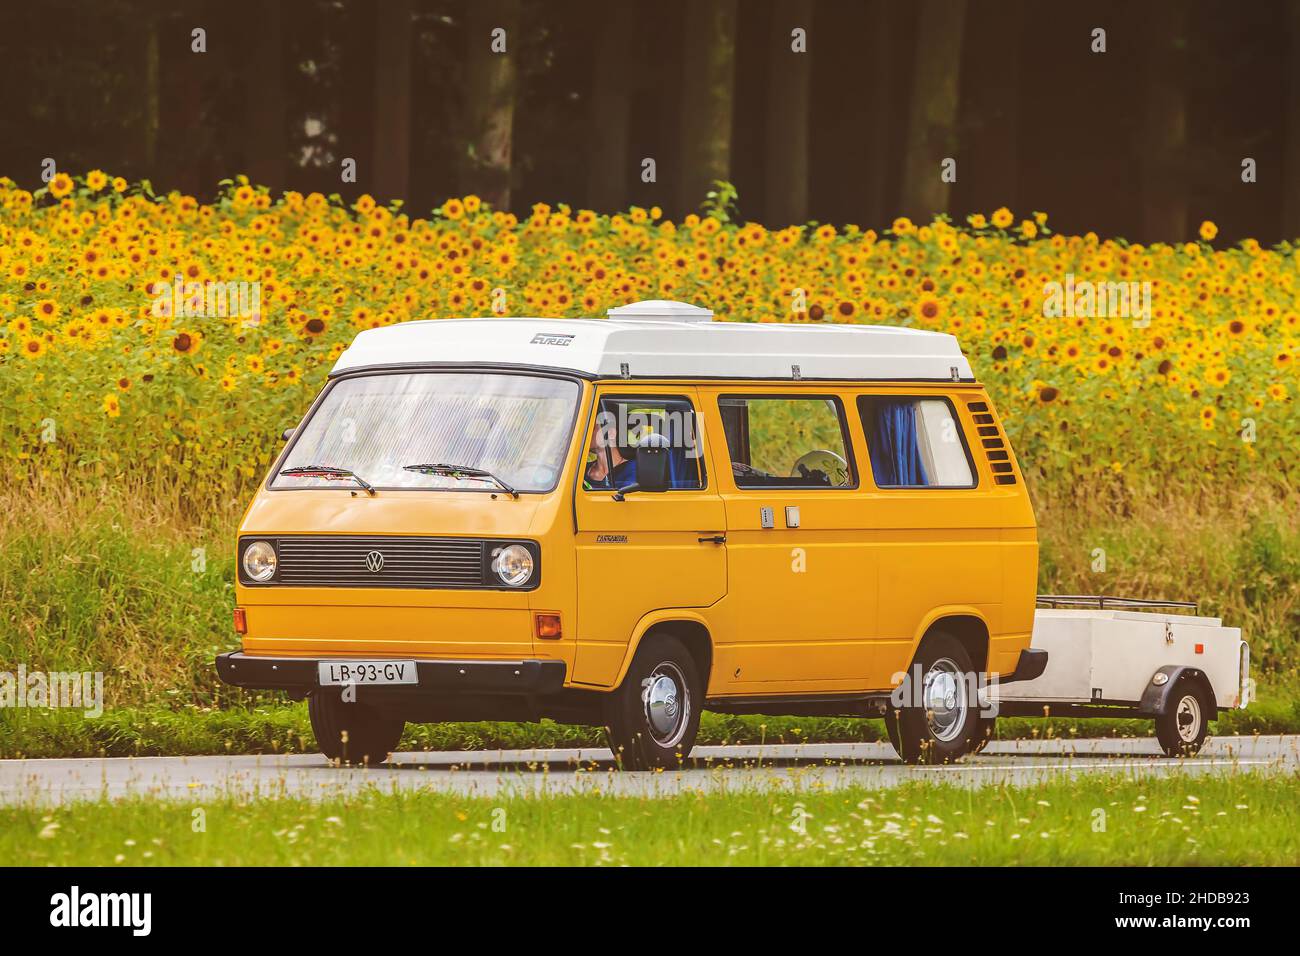 DIEREN, THE NETHERLANDS - AUGUST 14, 2016: Retro styled image of a Vintage Volkswagen Transporter with popup camper on a local road Stock Photo